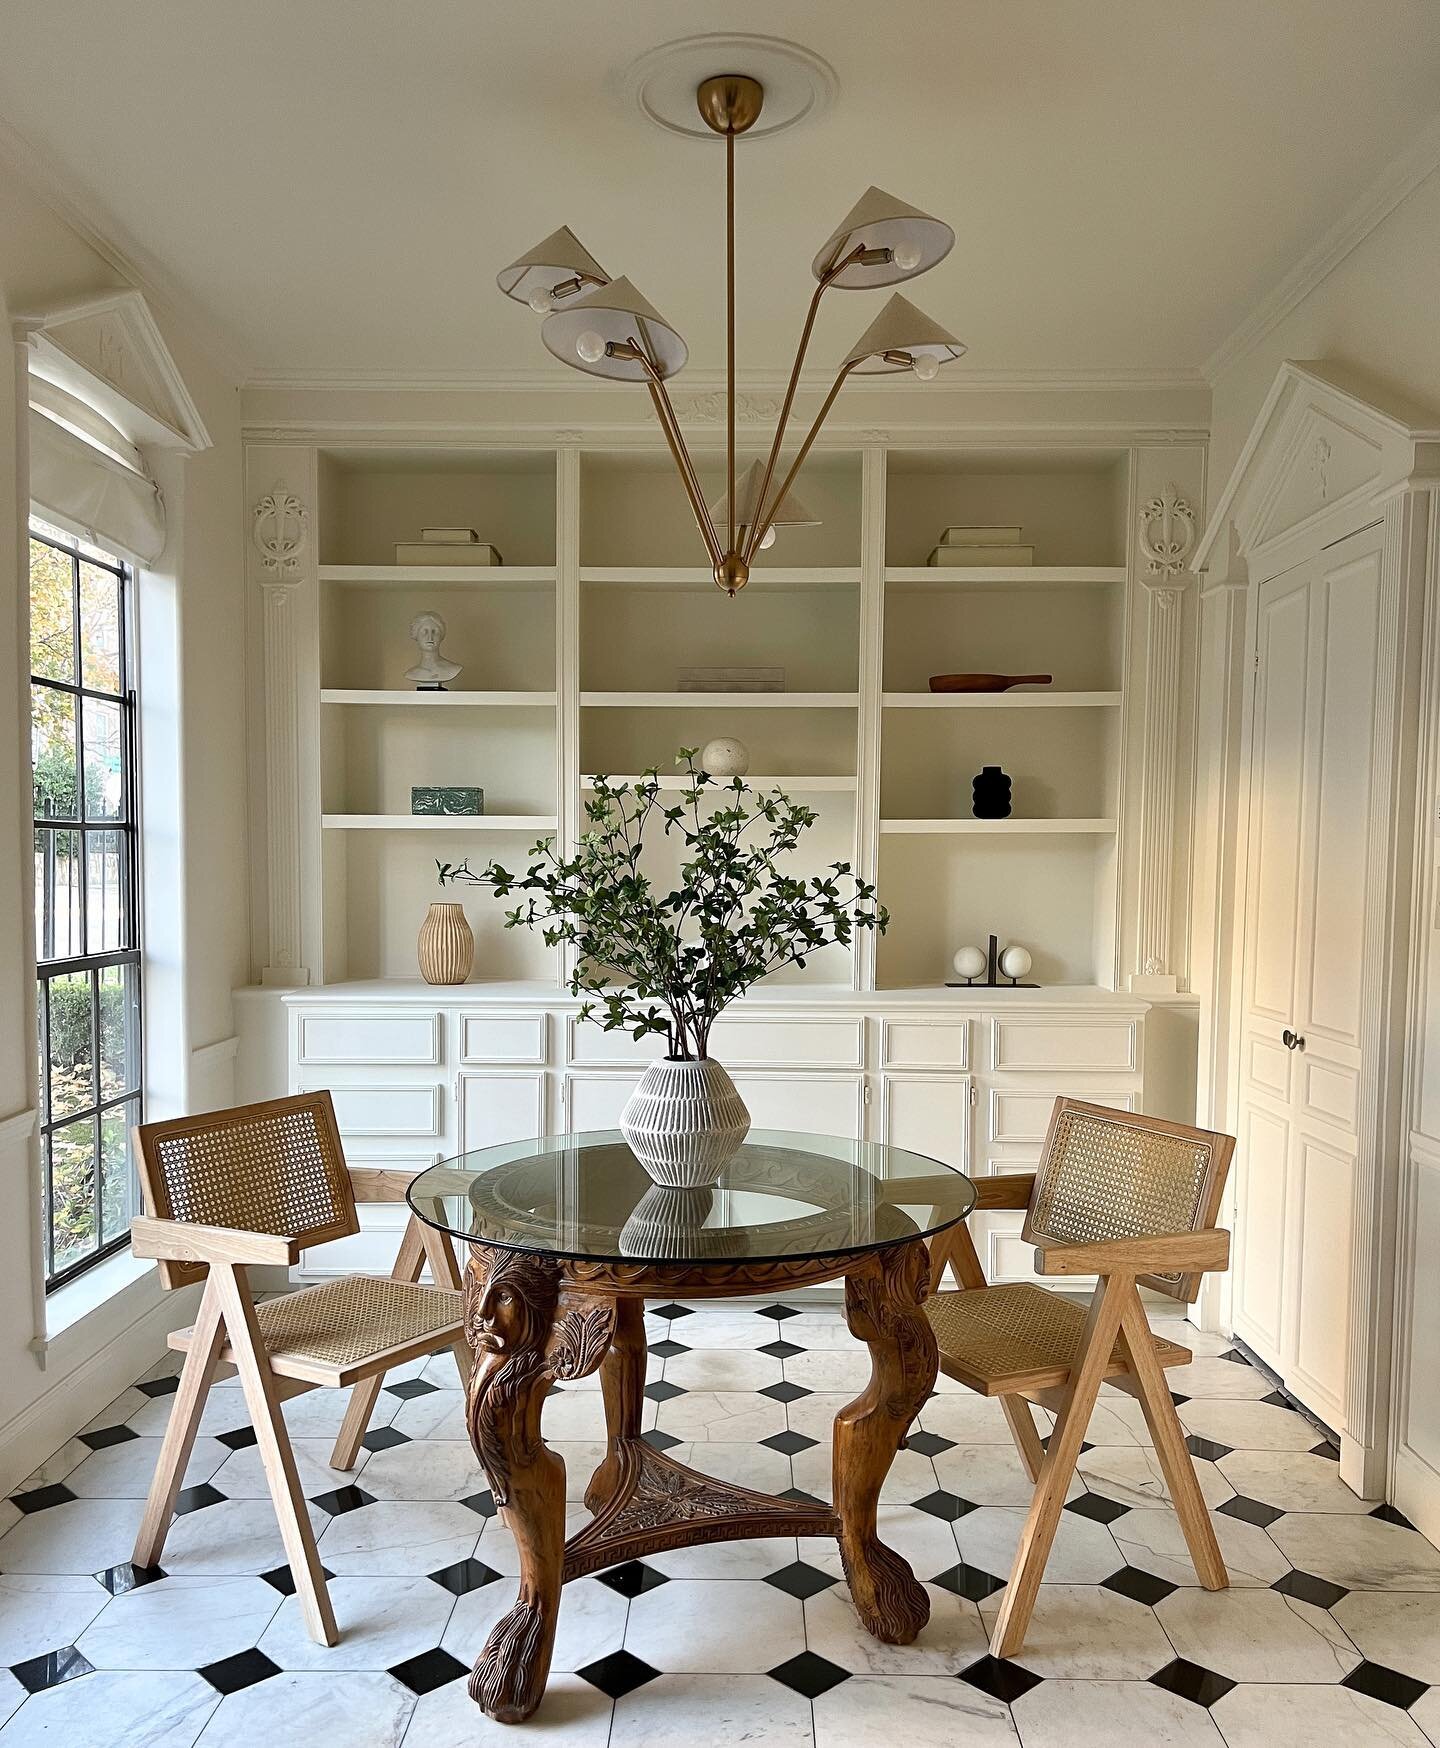 The dining space for two at Artistic Abode featuring a unique piece &mdash; a beautifully crafted mahogany claw foot dining table adorned with the heads of a lion
.
.
.
.
.
.
.
.
.
.
.
.

#interiordesign #neutralaesthetic #pierrejeanneret #midcentury